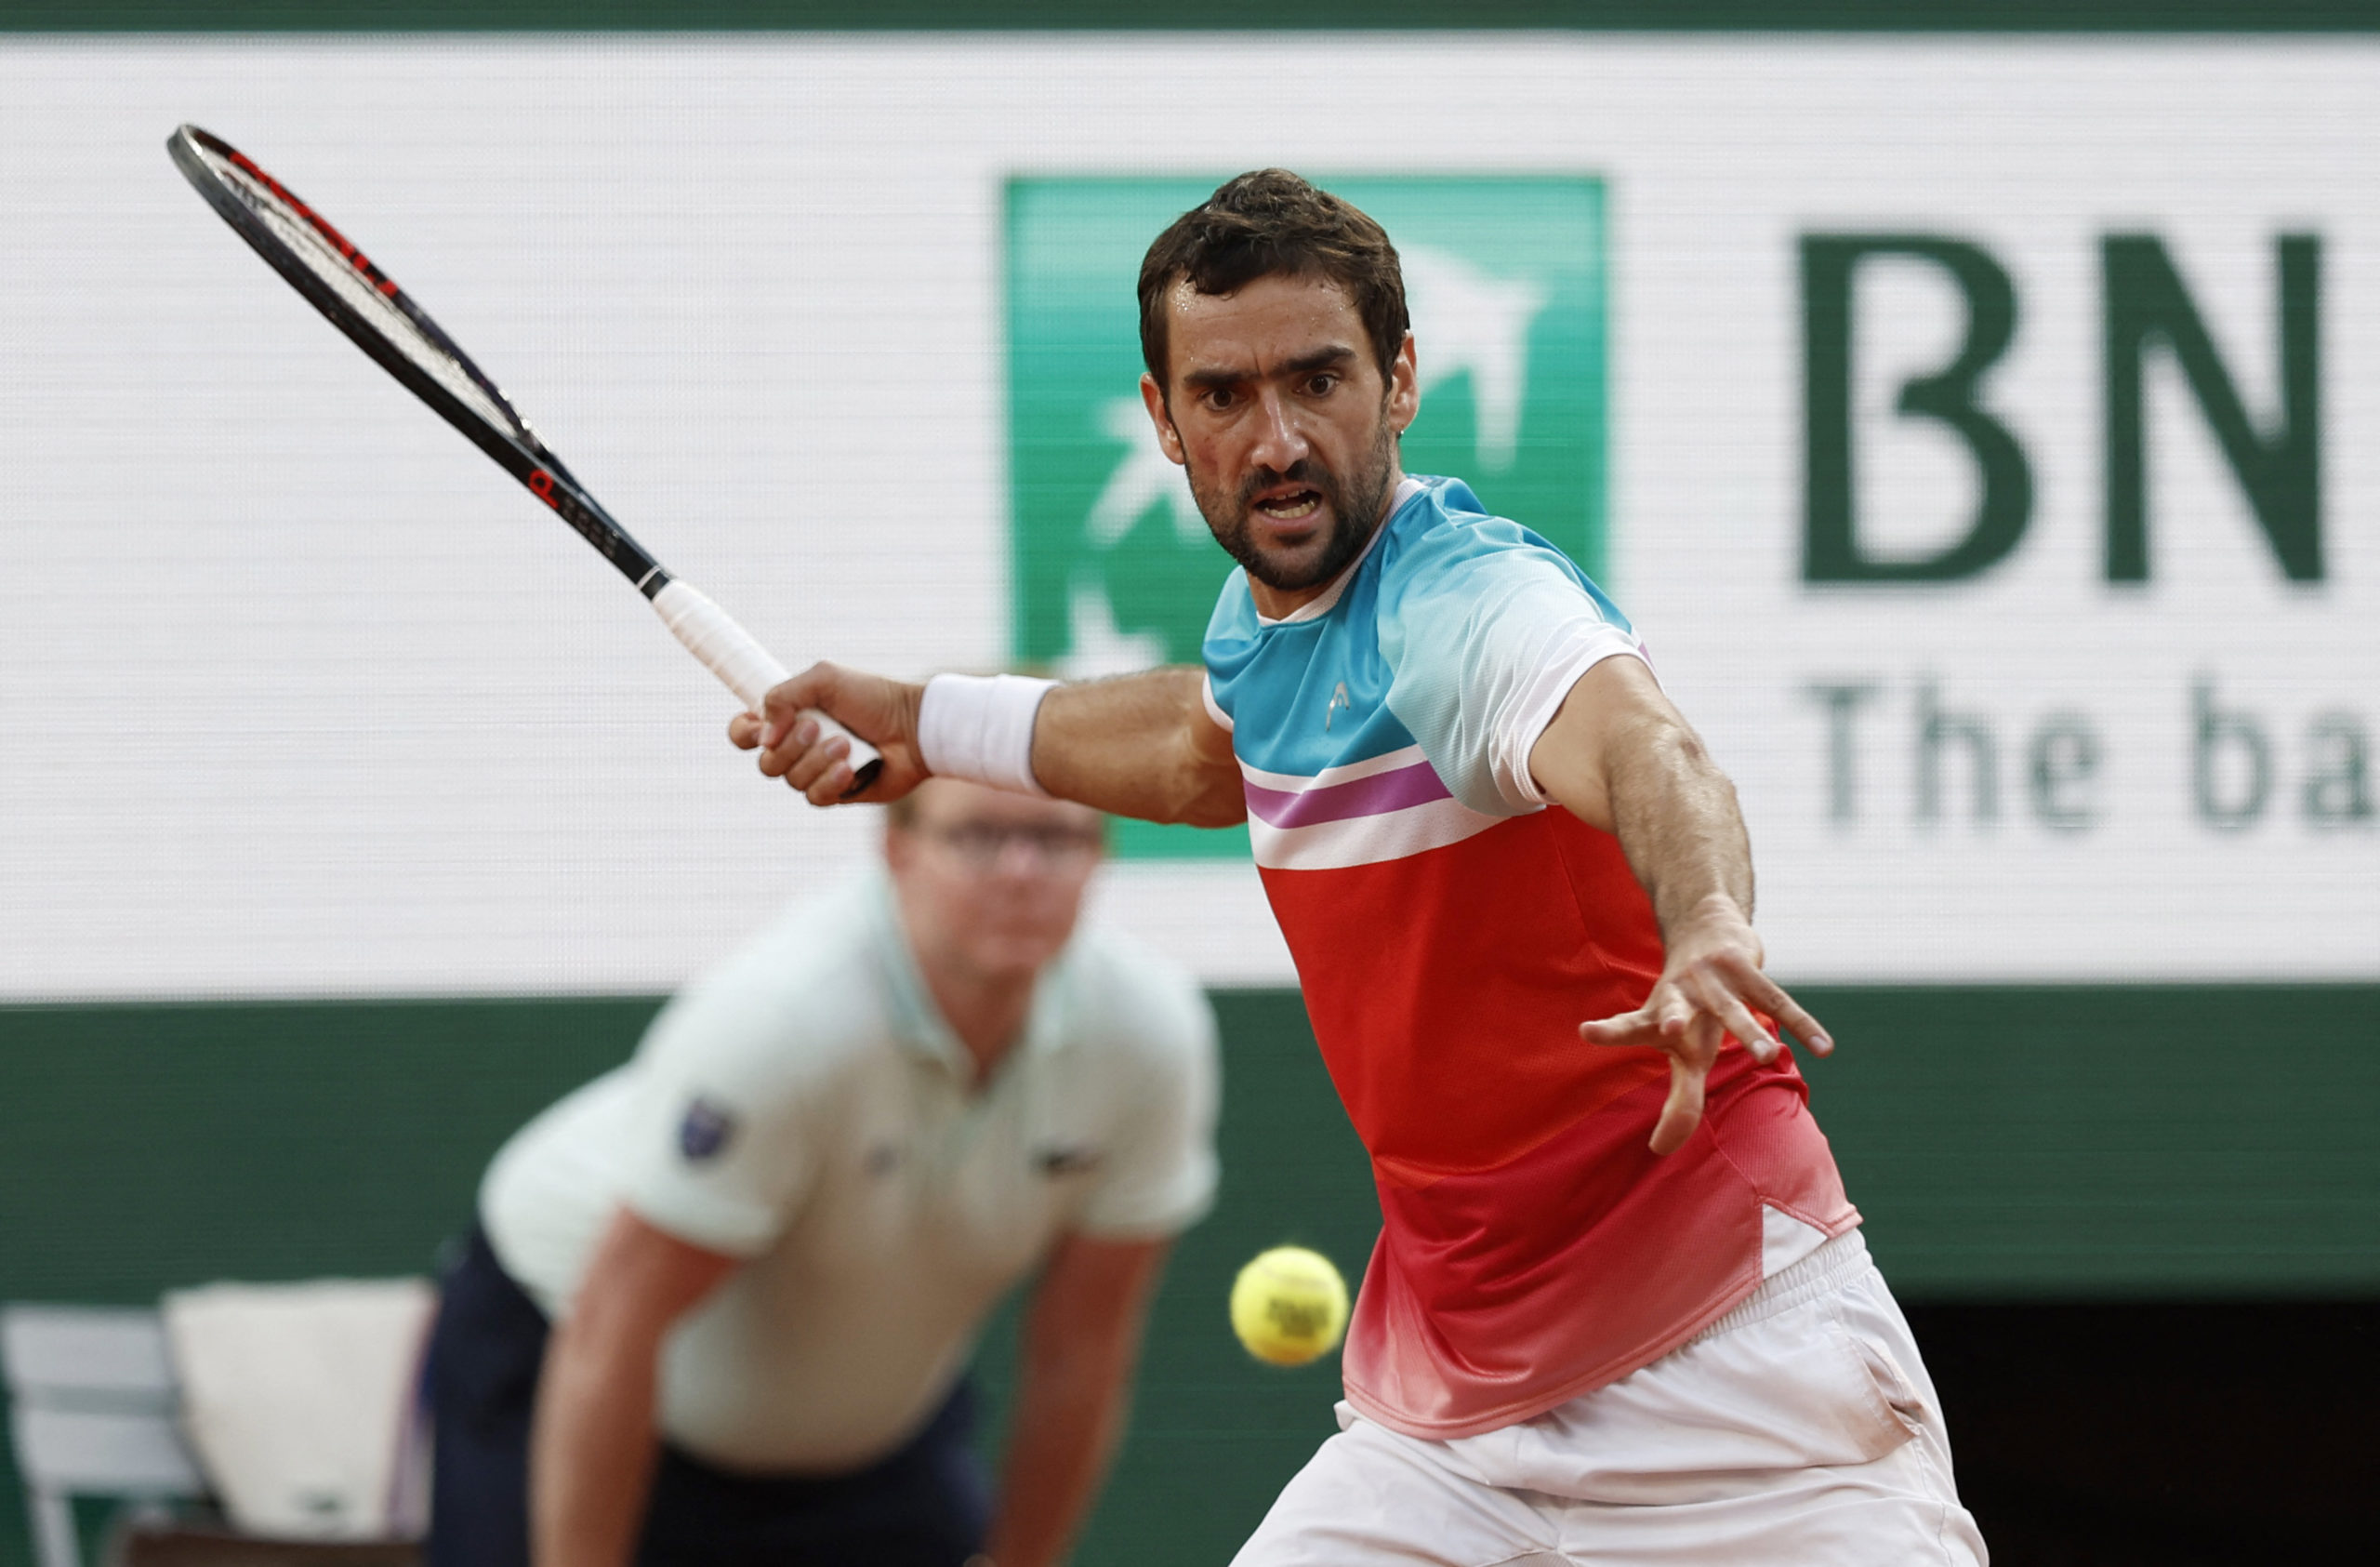 Tennis - French Open - Roland Garros, Paris, France - June 1, 2022 Croatia's Marin Cilic in action during his quarter final match against Russia's Andrey Rublev REUTERS/Benoit Tessier